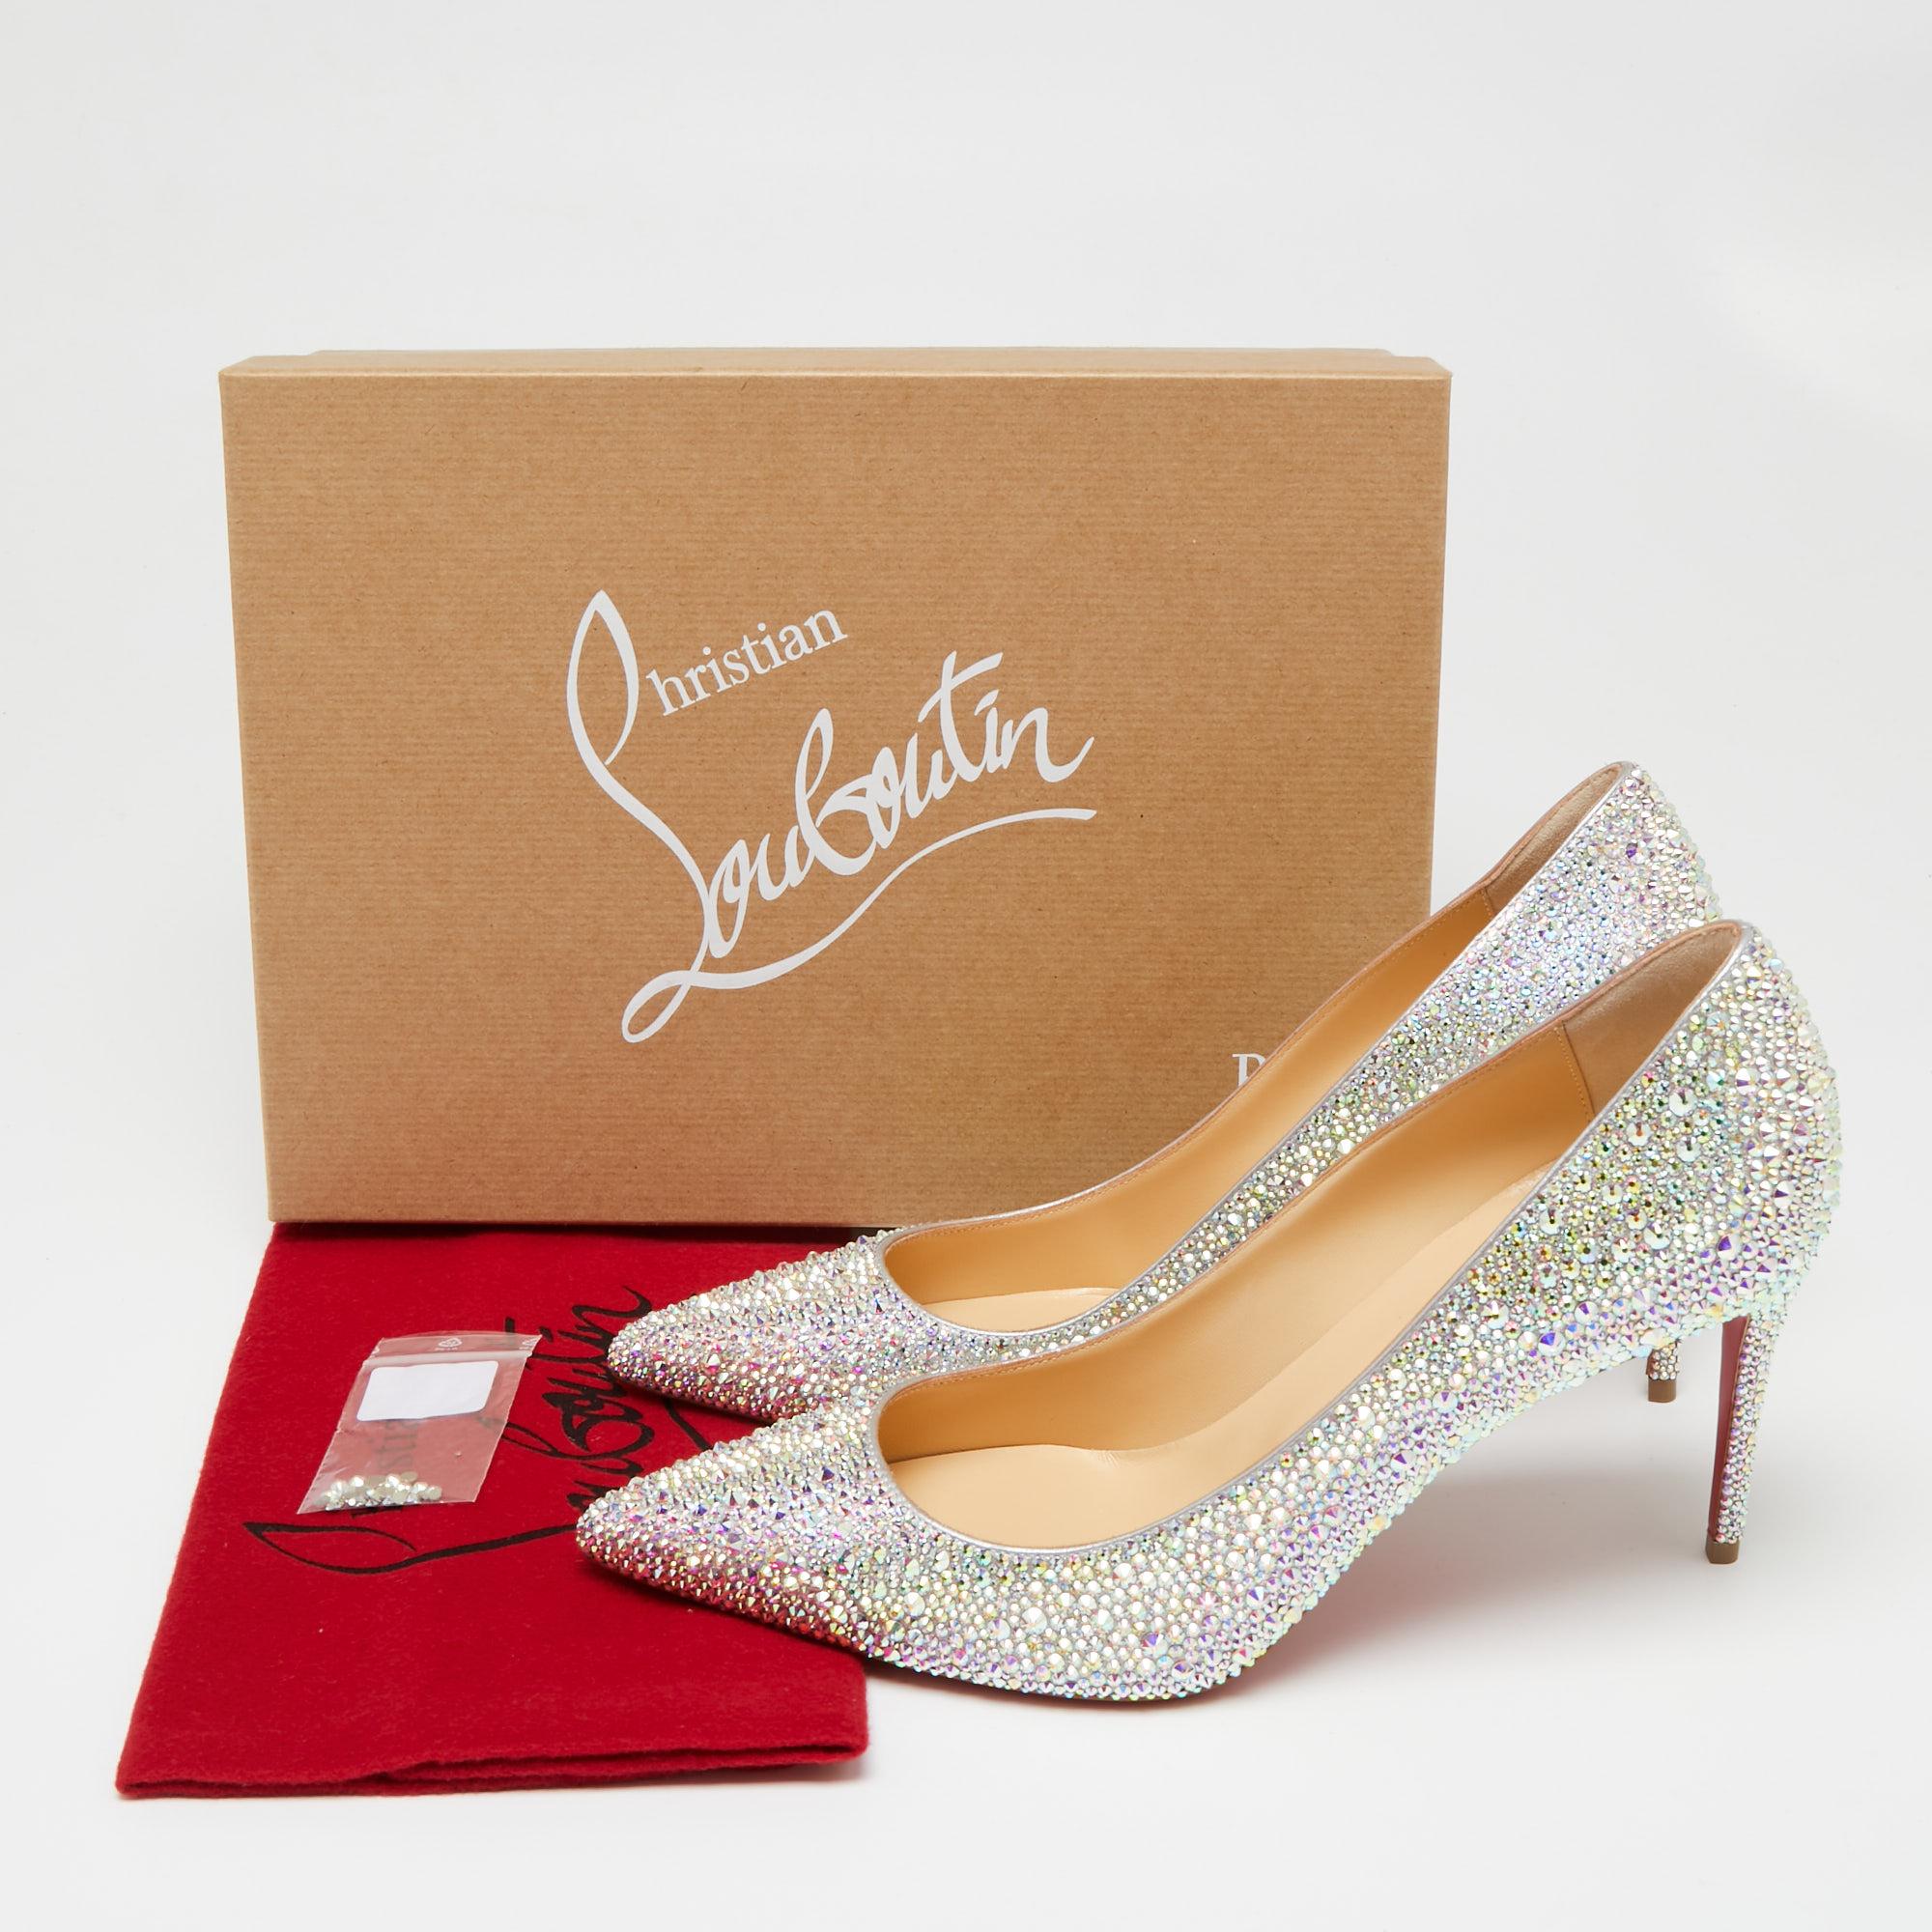 Women's Christian Louboutin Multicolor Leather Strass Degrade Kate Pumps Size 39